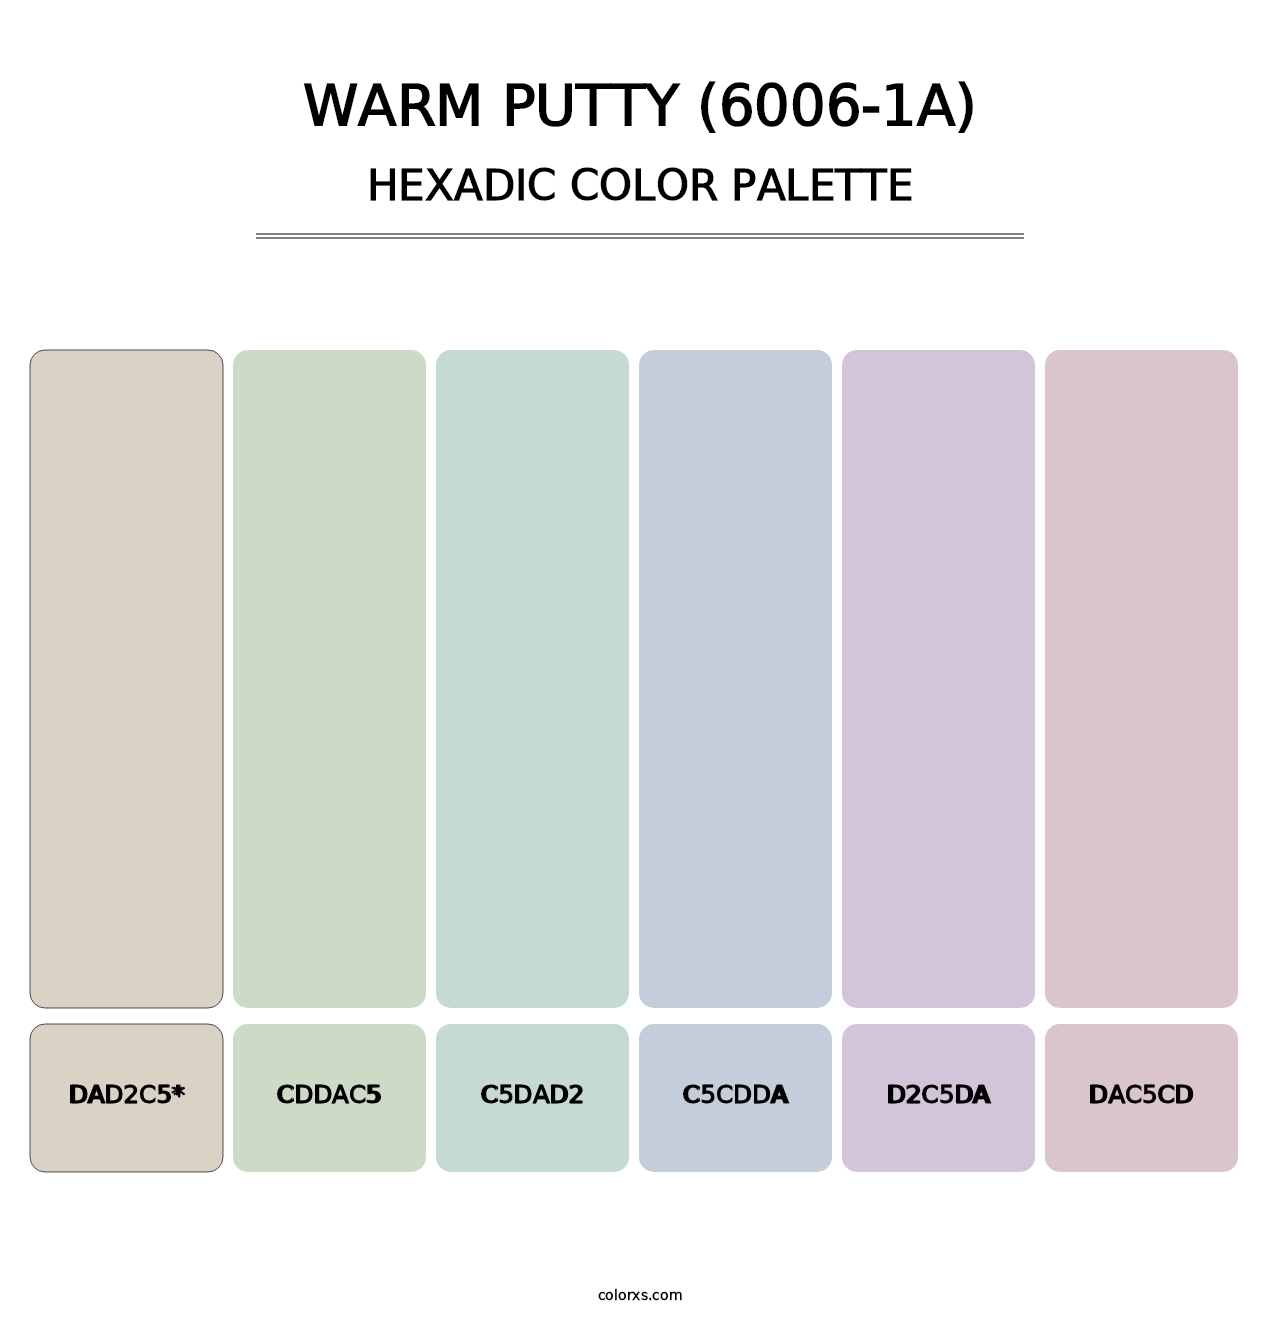 Warm Putty (6006-1A) - Hexadic Color Palette